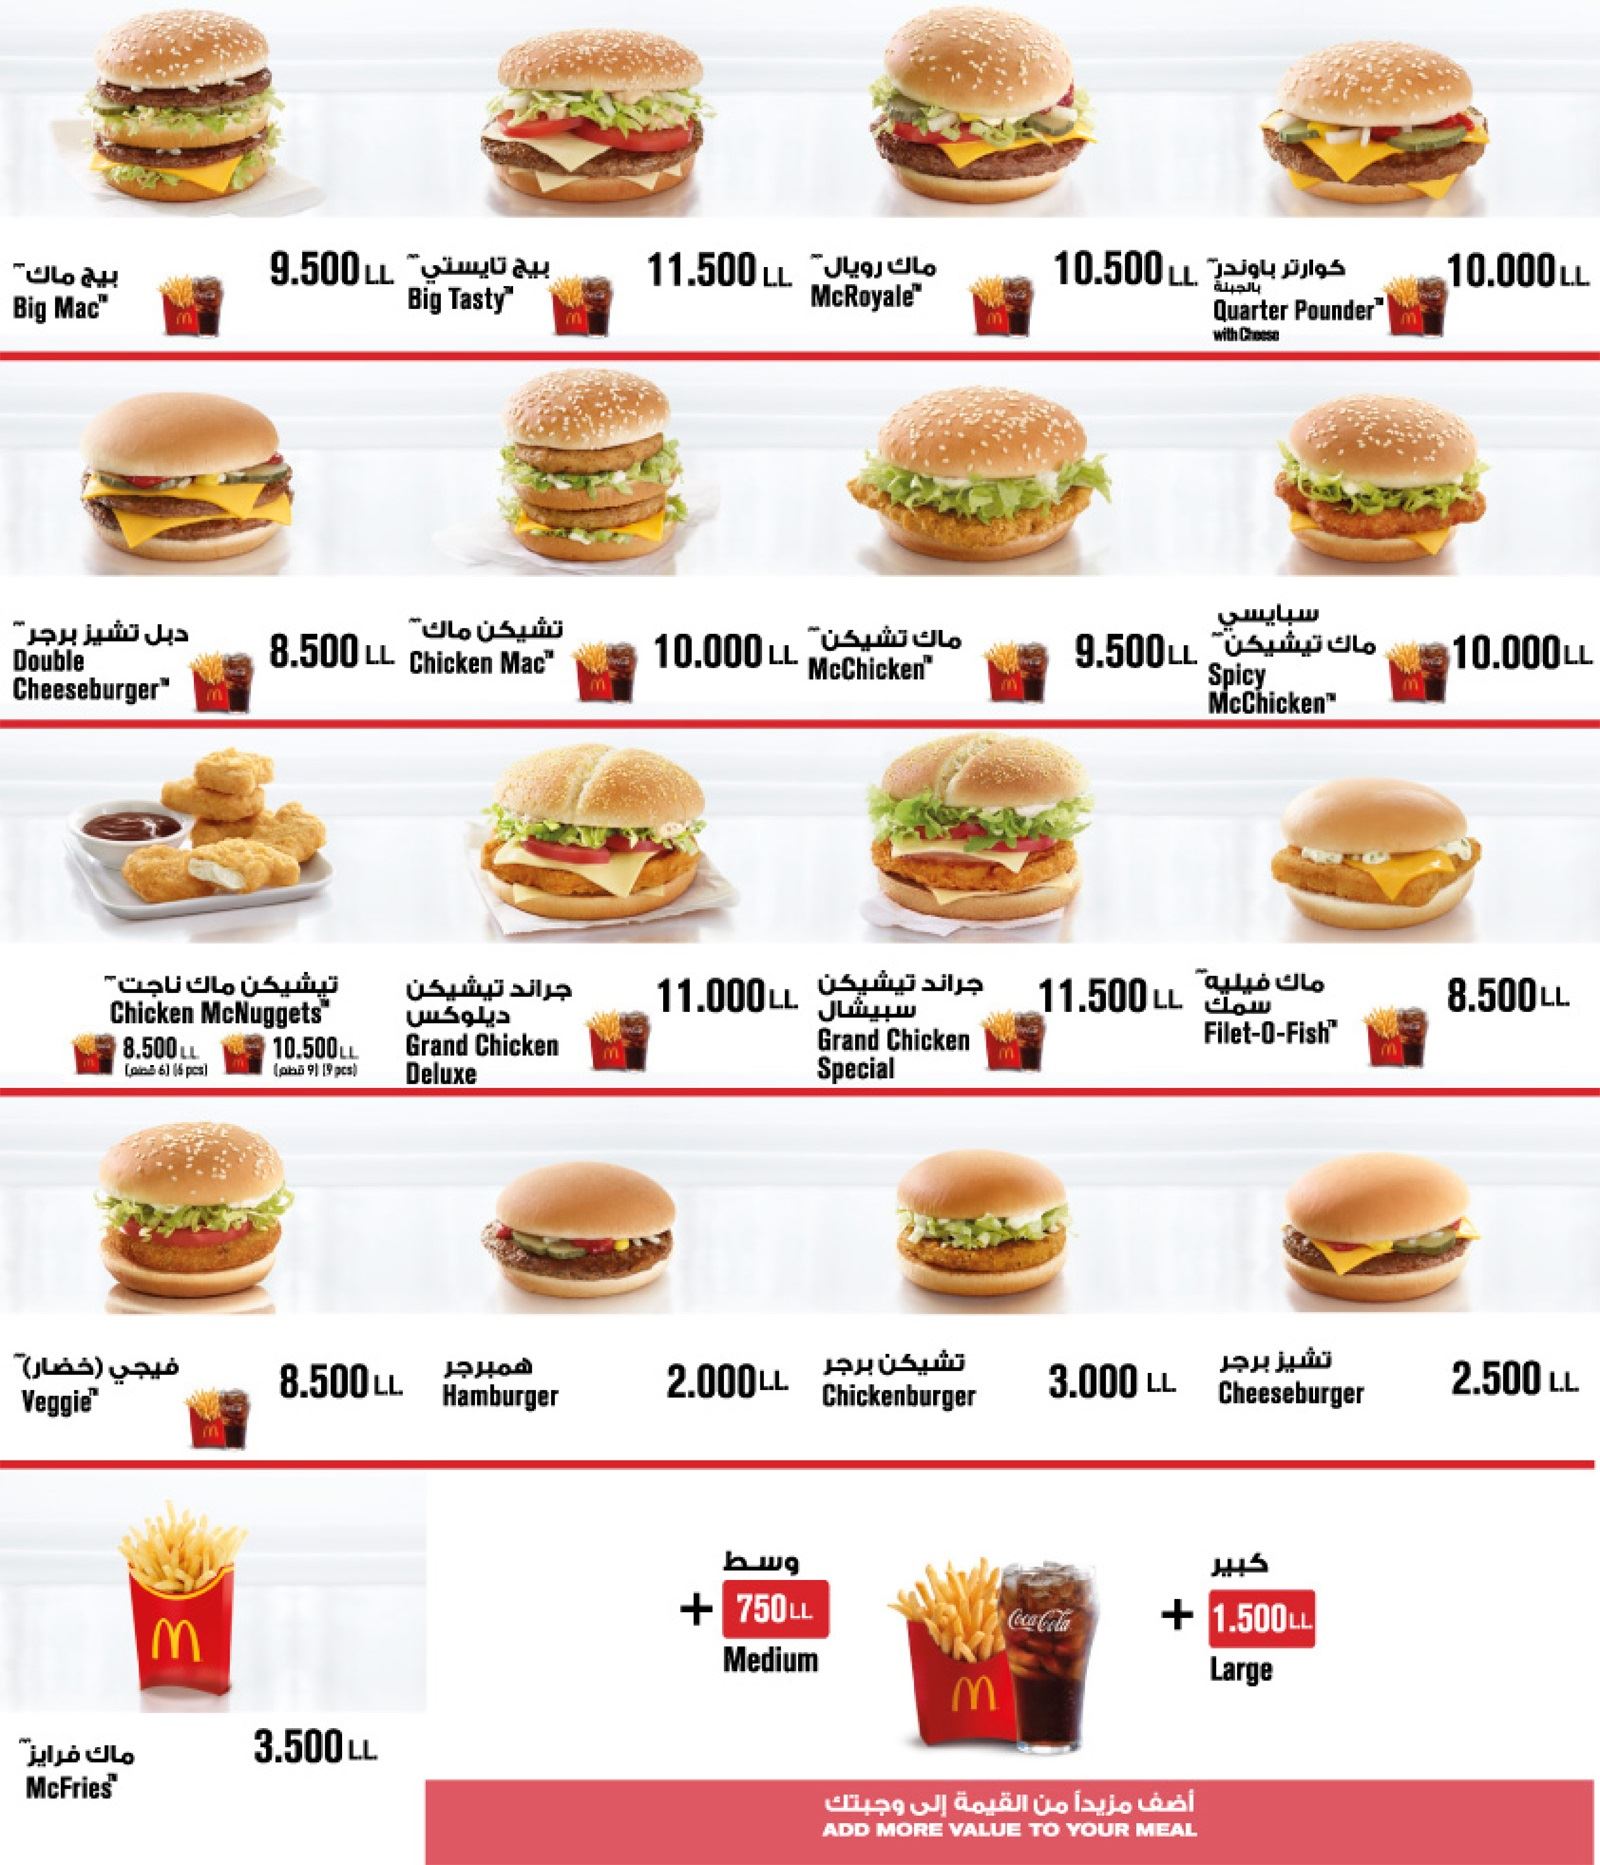 Albums 95+ Pictures Mcdonald's Menu With Pictures And Prices Latest